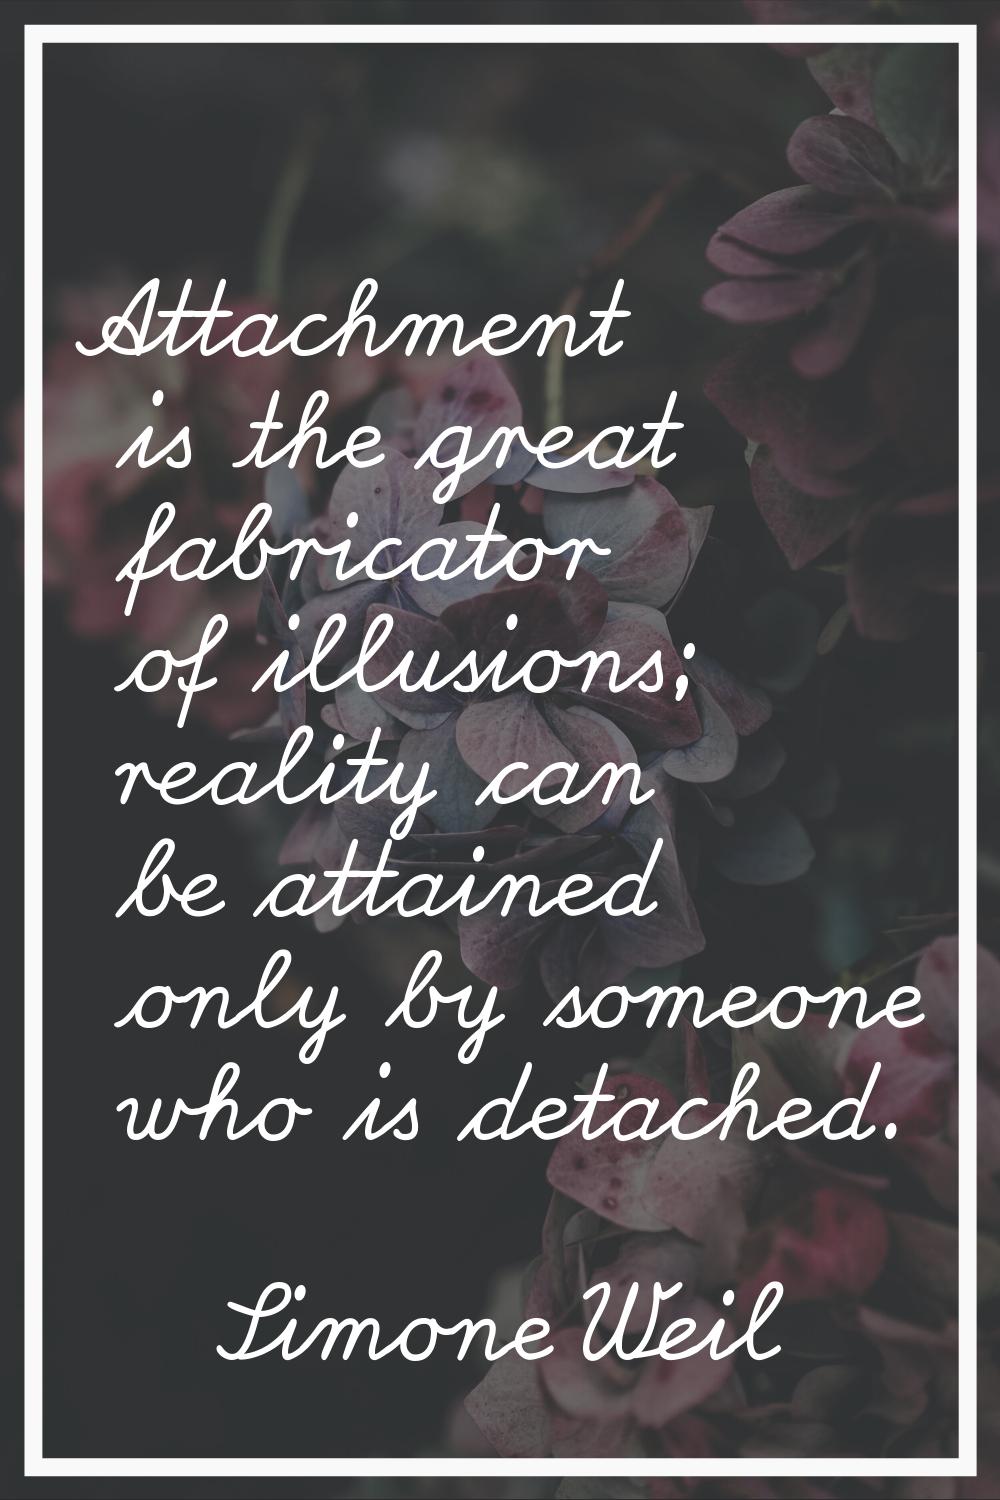 Attachment is the great fabricator of illusions; reality can be attained only by someone who is det